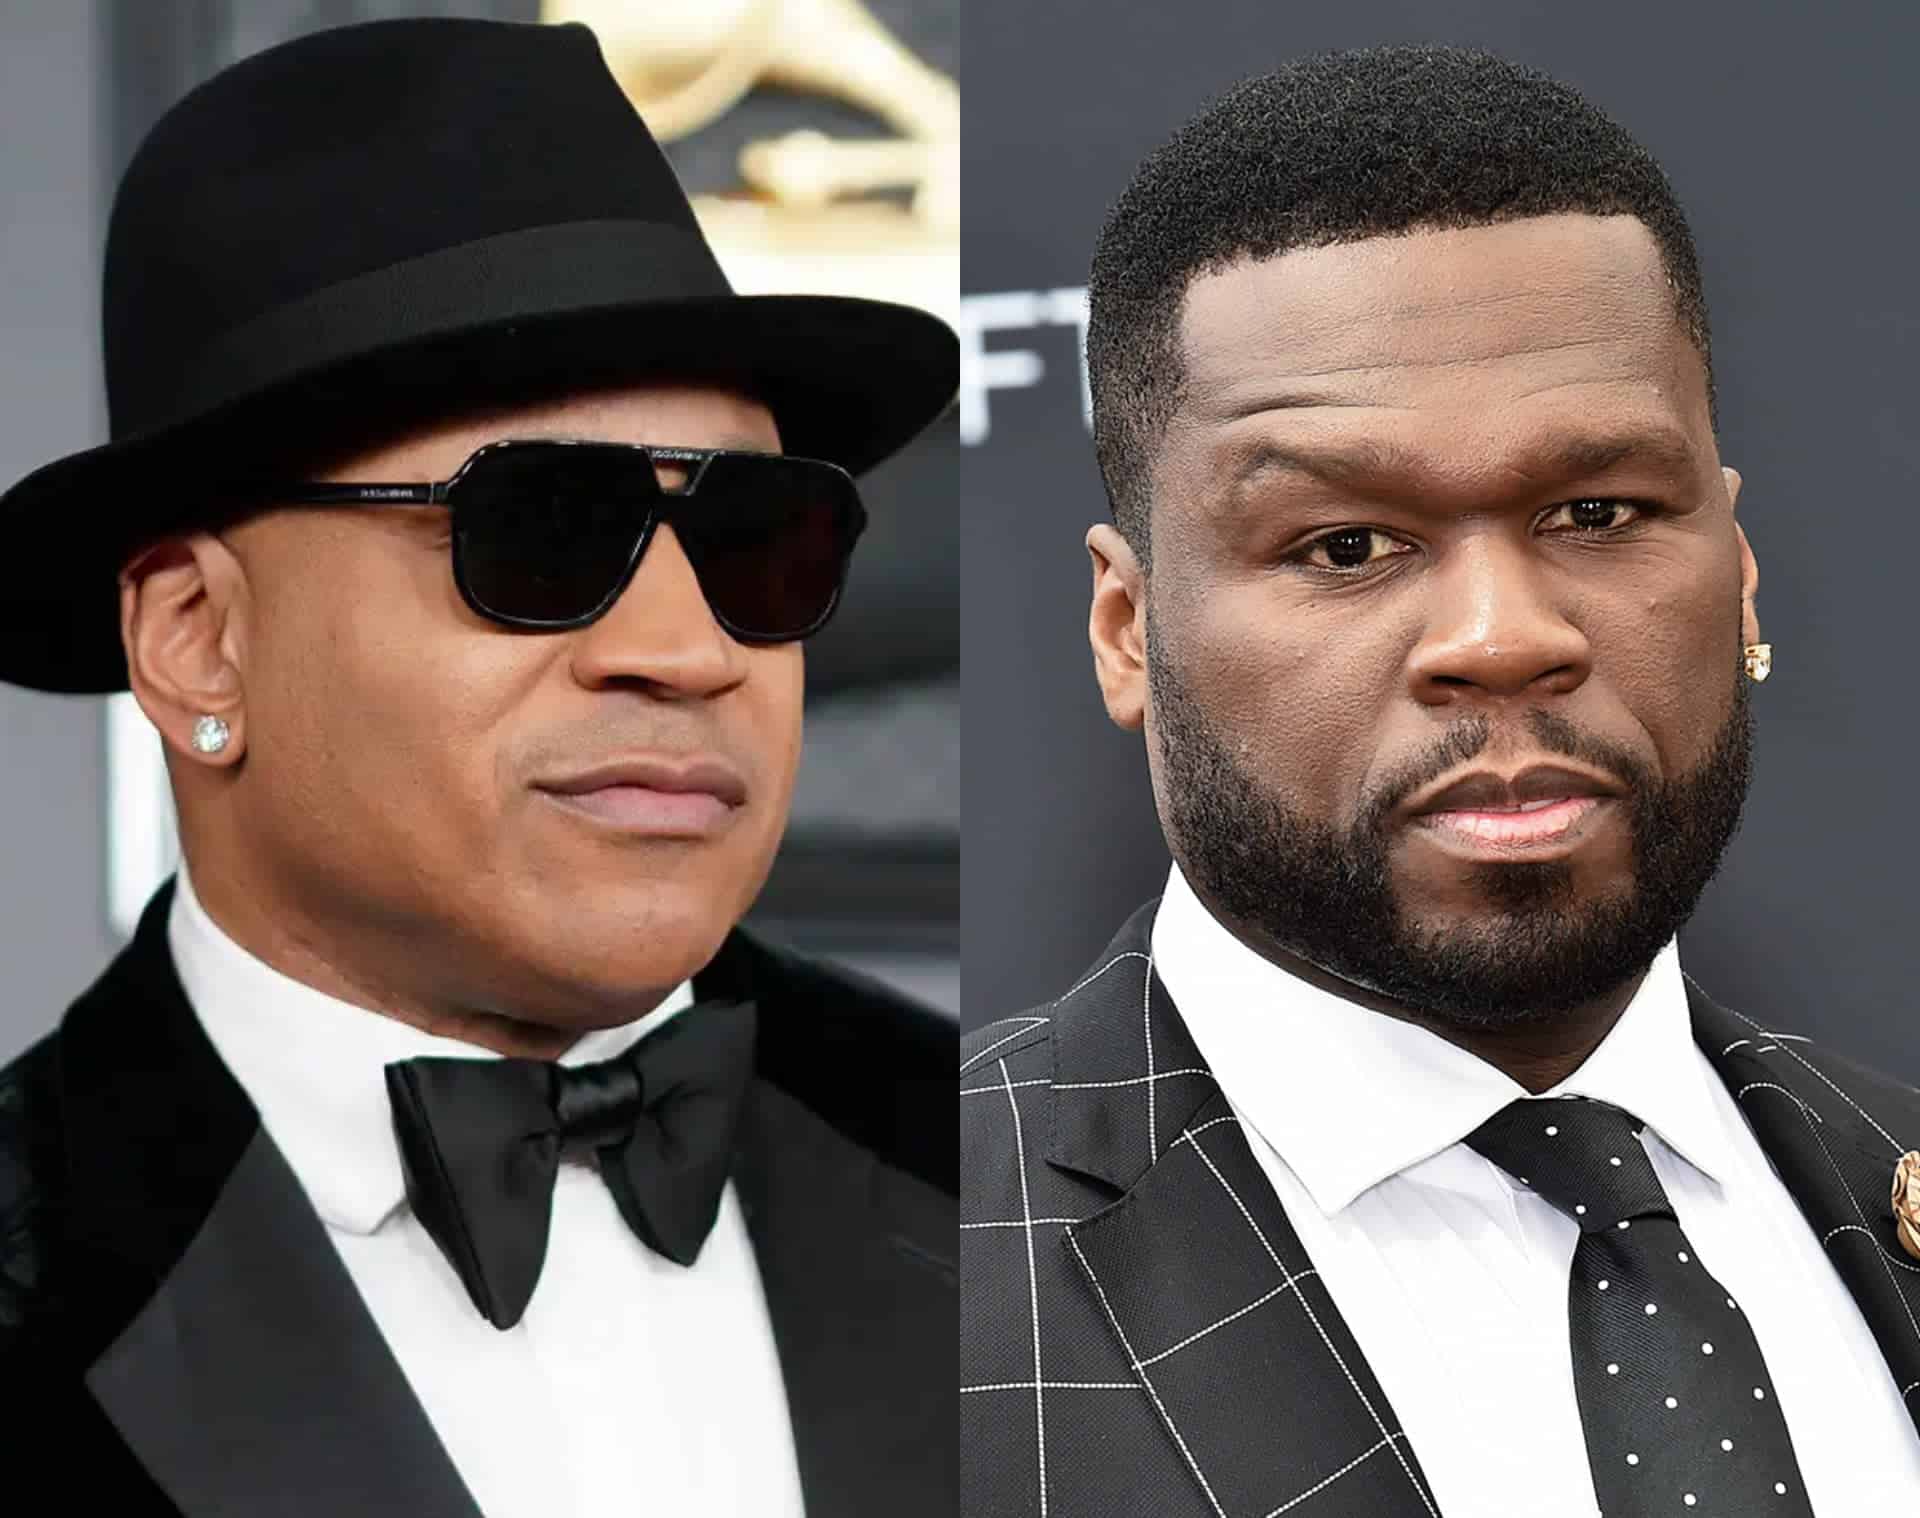 LL Cool J Reveals He Once Scrapped A Collab Album With 50 Cent It Didn't Work